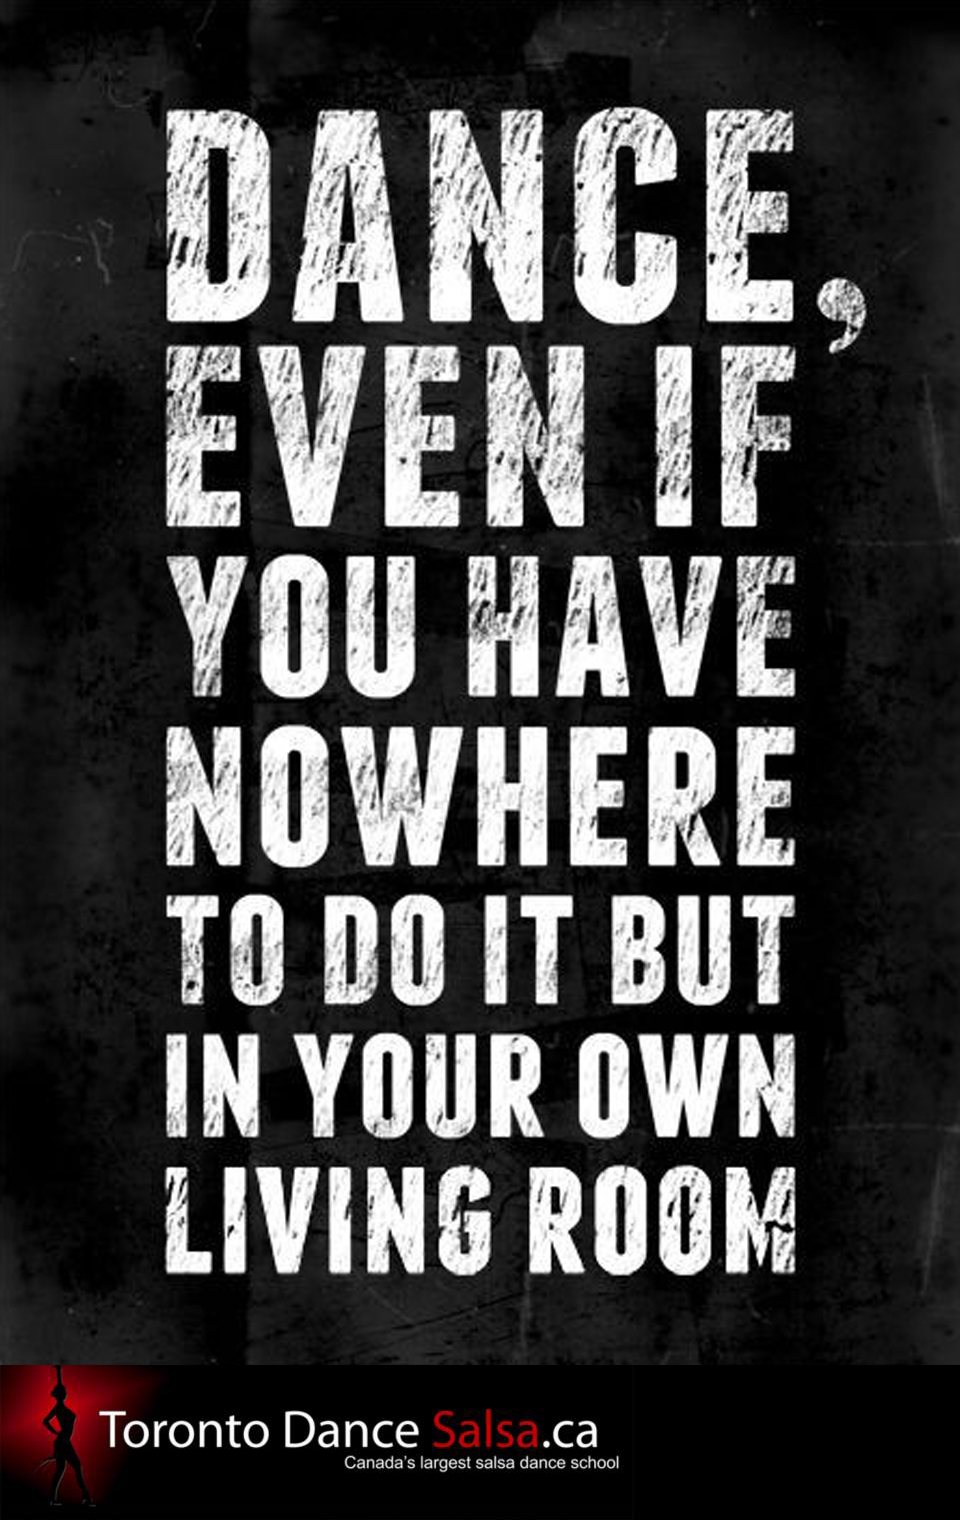 Dance, even if you have nowhere to do it but in your own living room. 